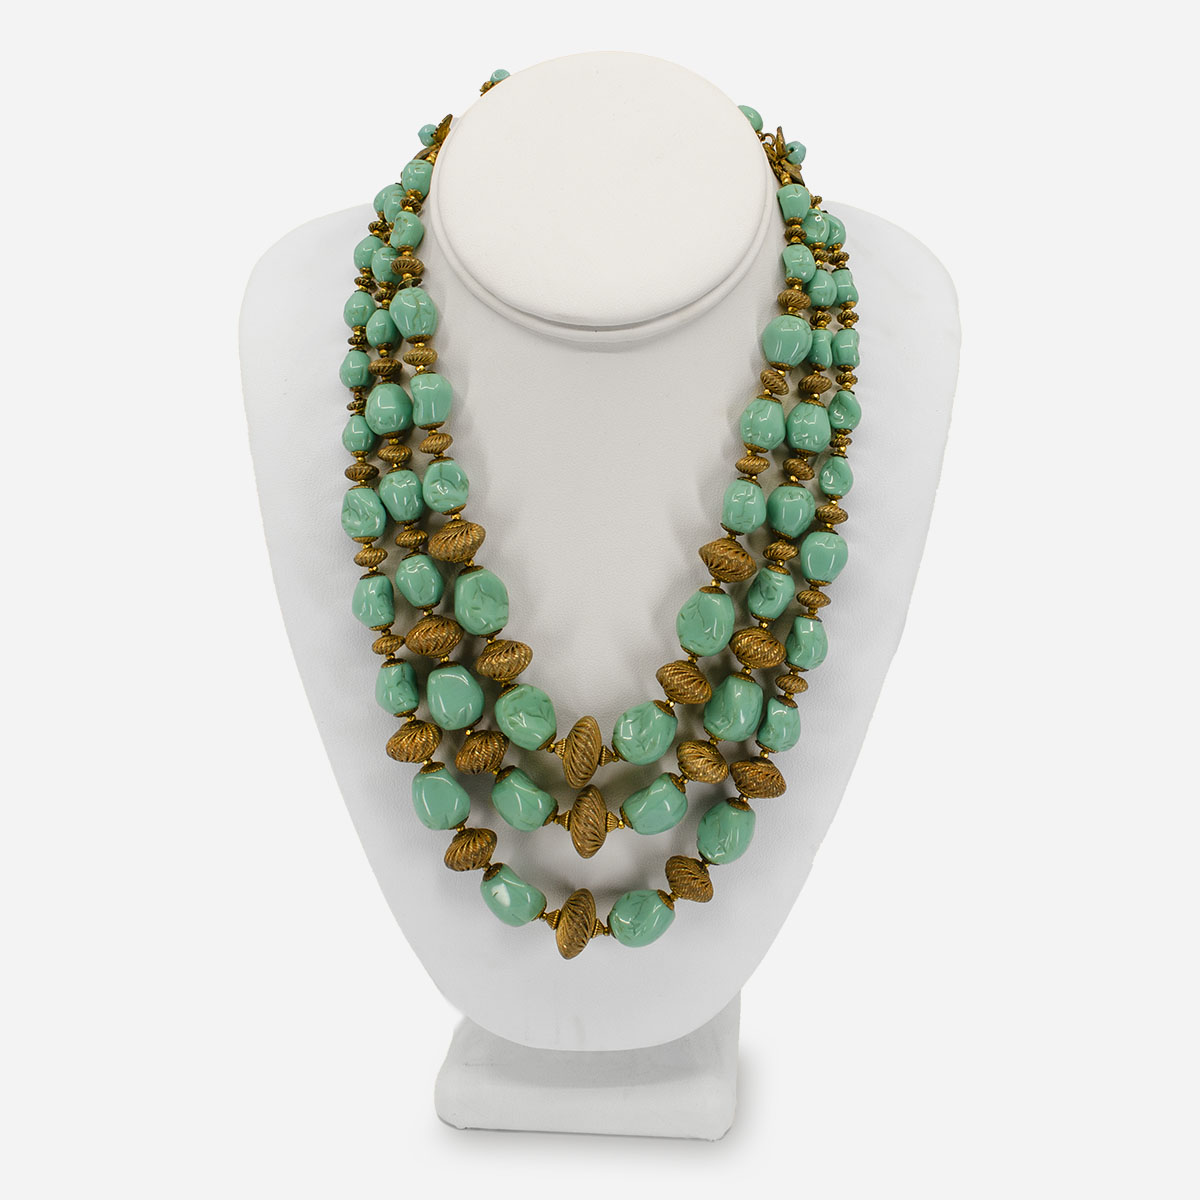 1950s turquoise glass bead and gold bead necklace